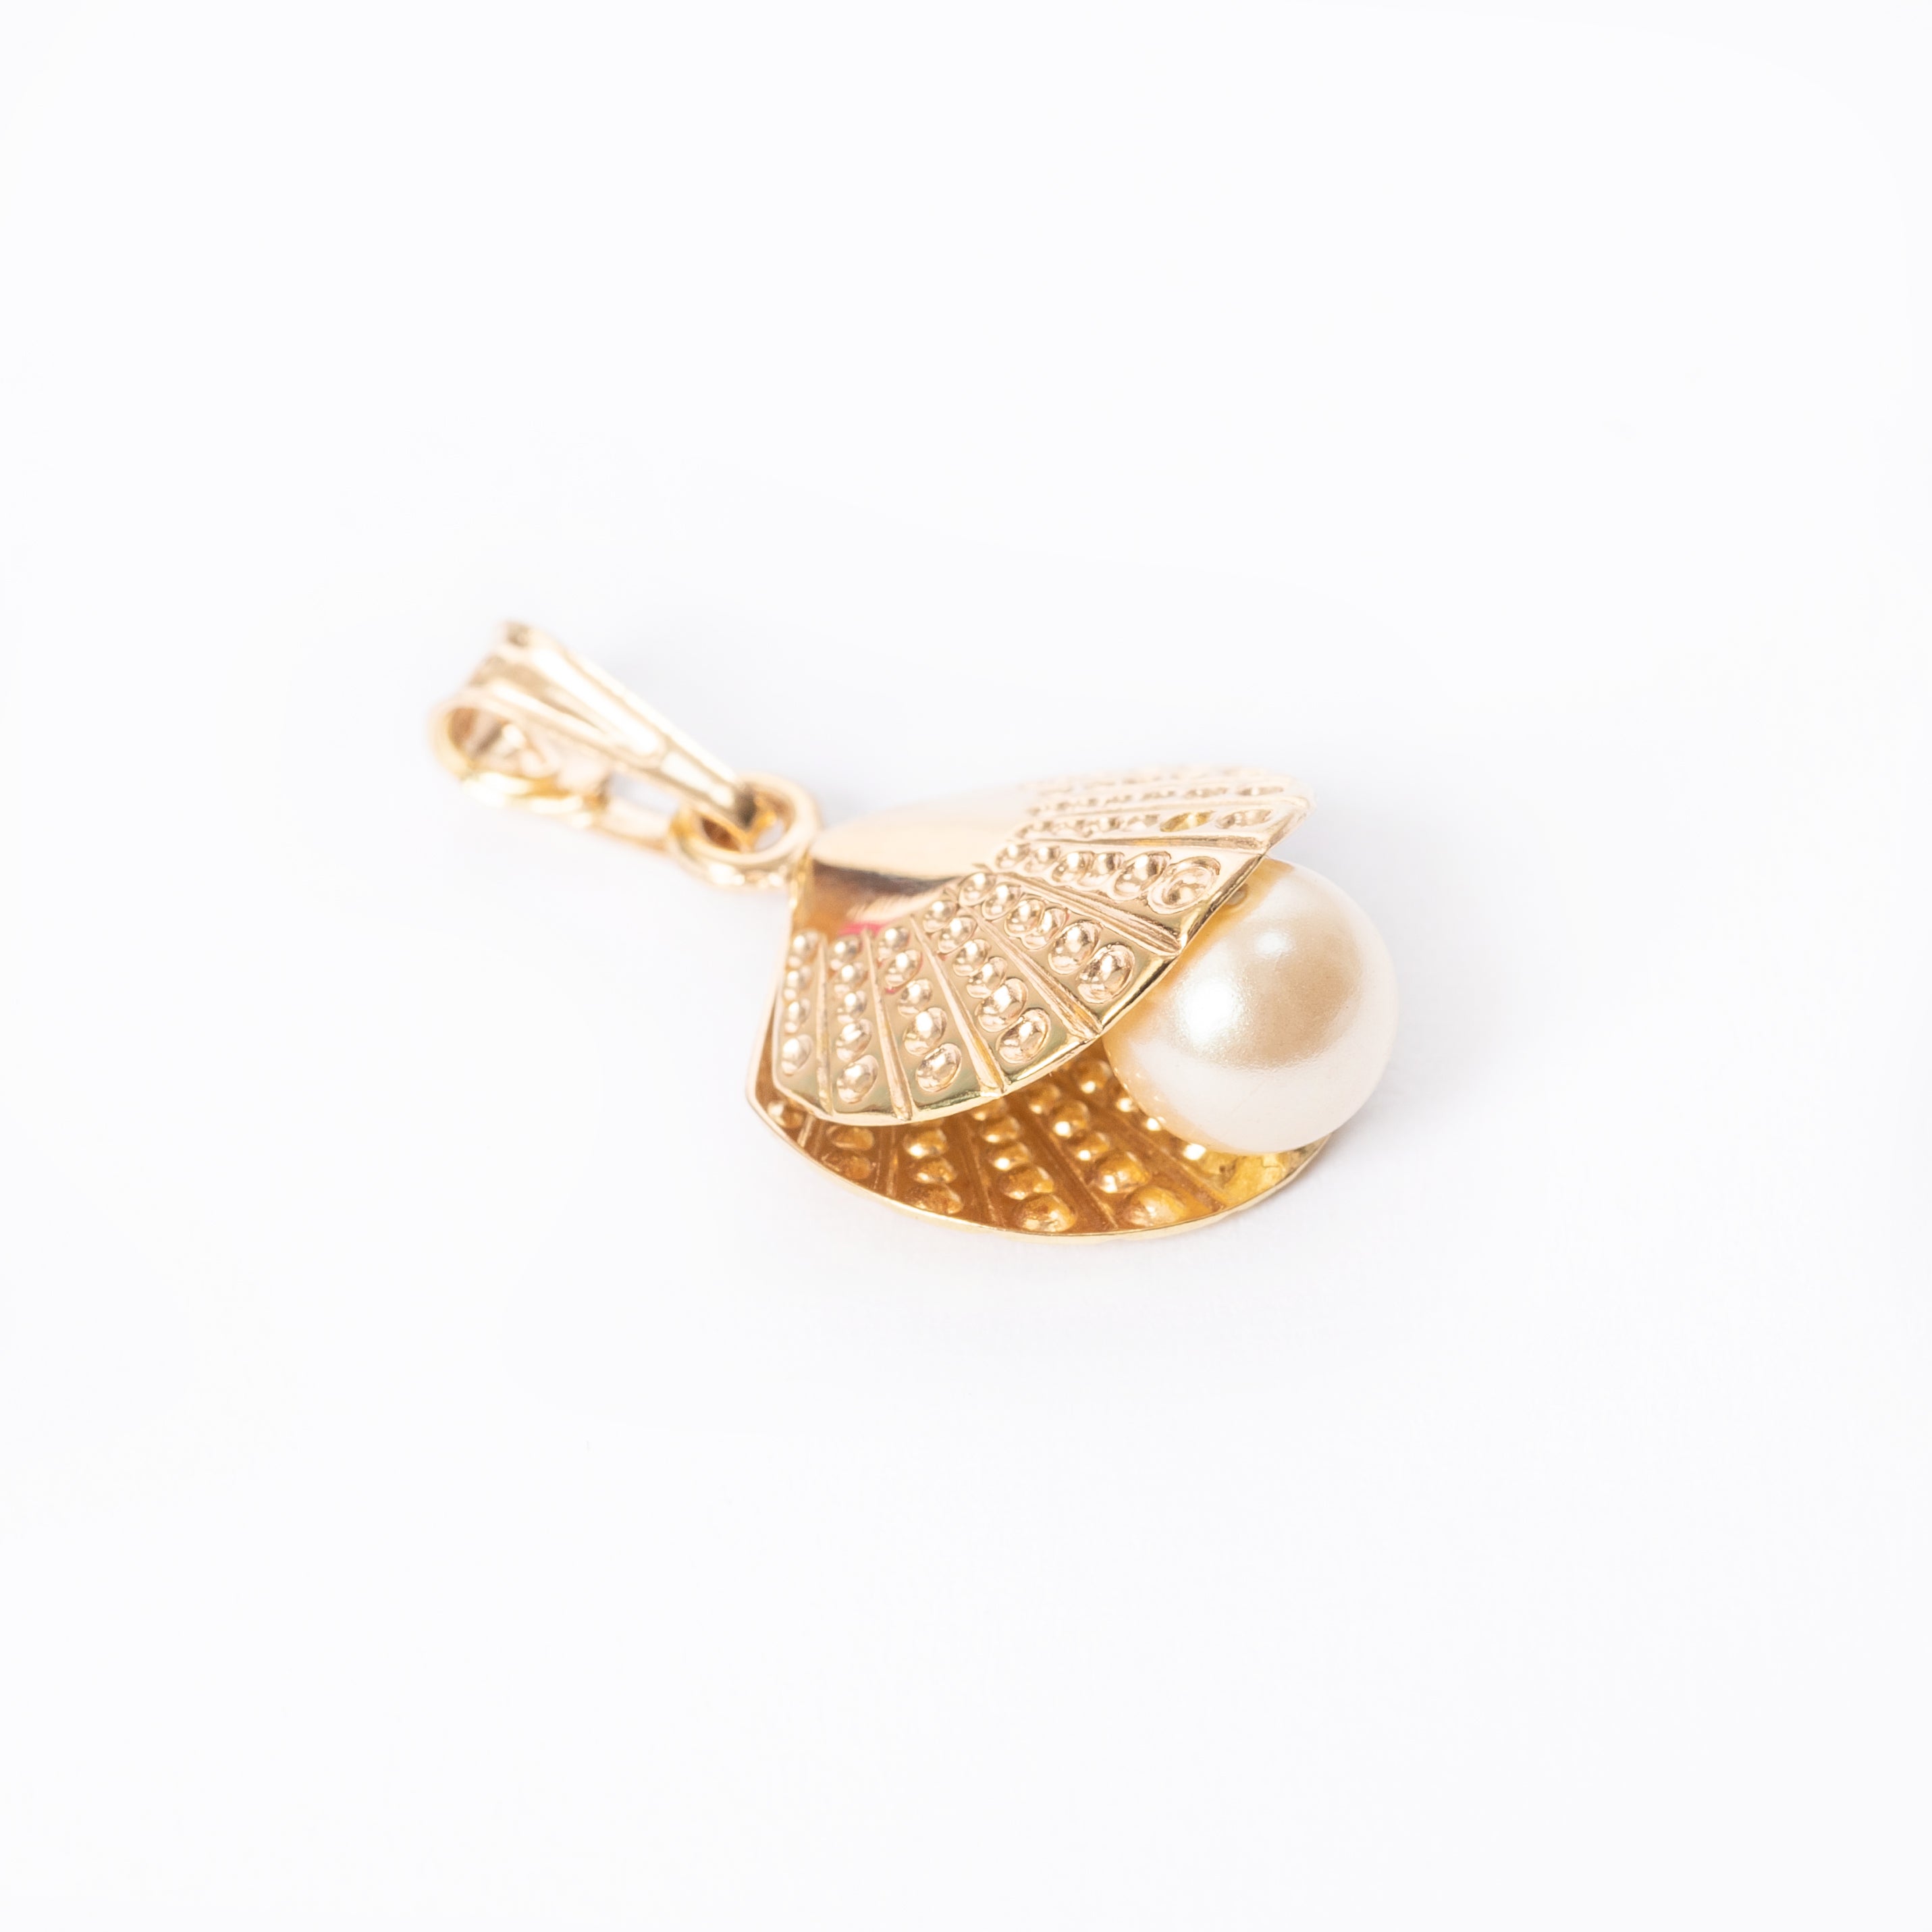 Oyster Pearl Pendant